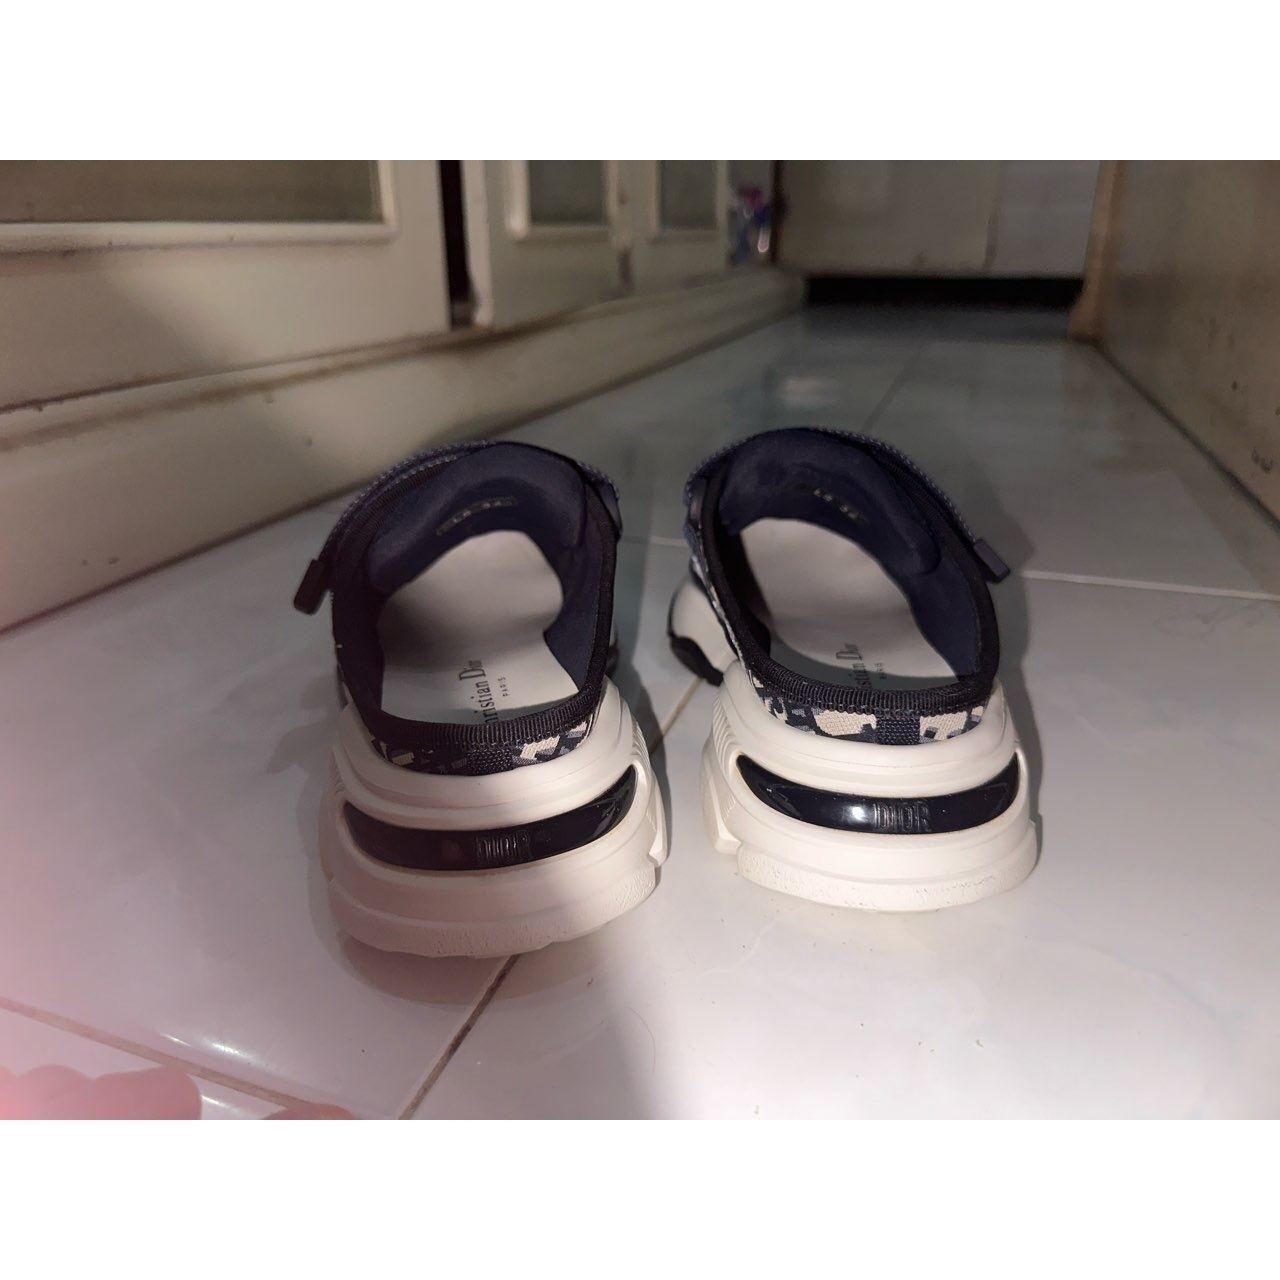 Christian Dior Navy Sneakers